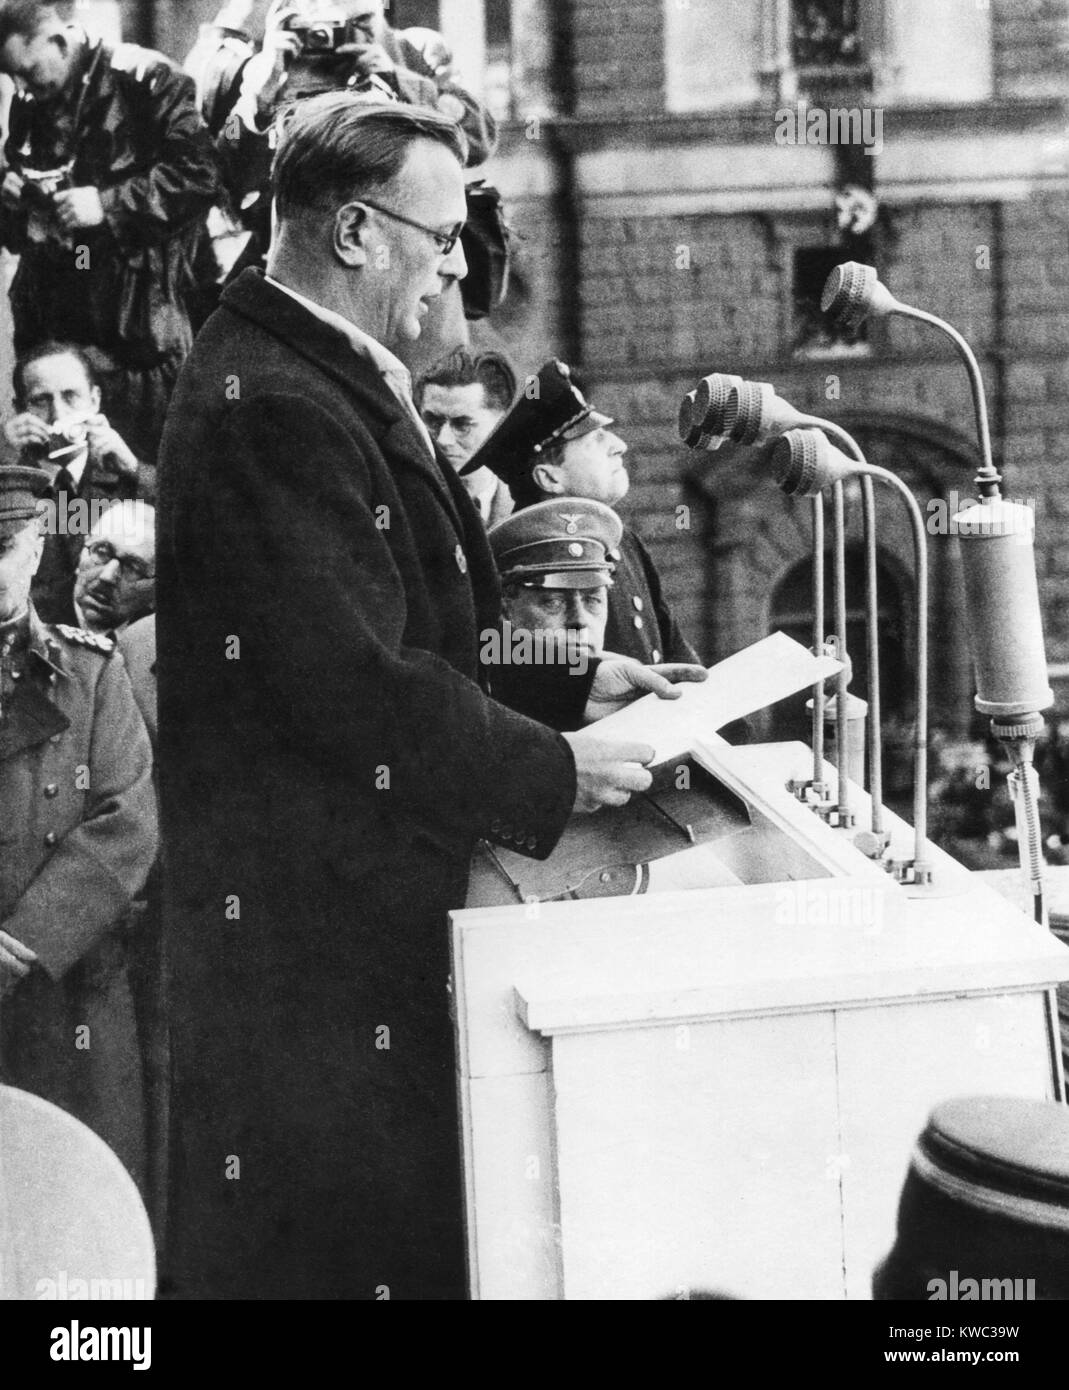 Arthur Seyss-Inquart was Chancellor of Austria for two days before the German annexation of Austria. The Austria Nazi politician became a minister in Hitler's Cabinet and was hanged for war crimes at Nurembuerg in 1946. (BSLOC 2015 13 27) Stock Photo